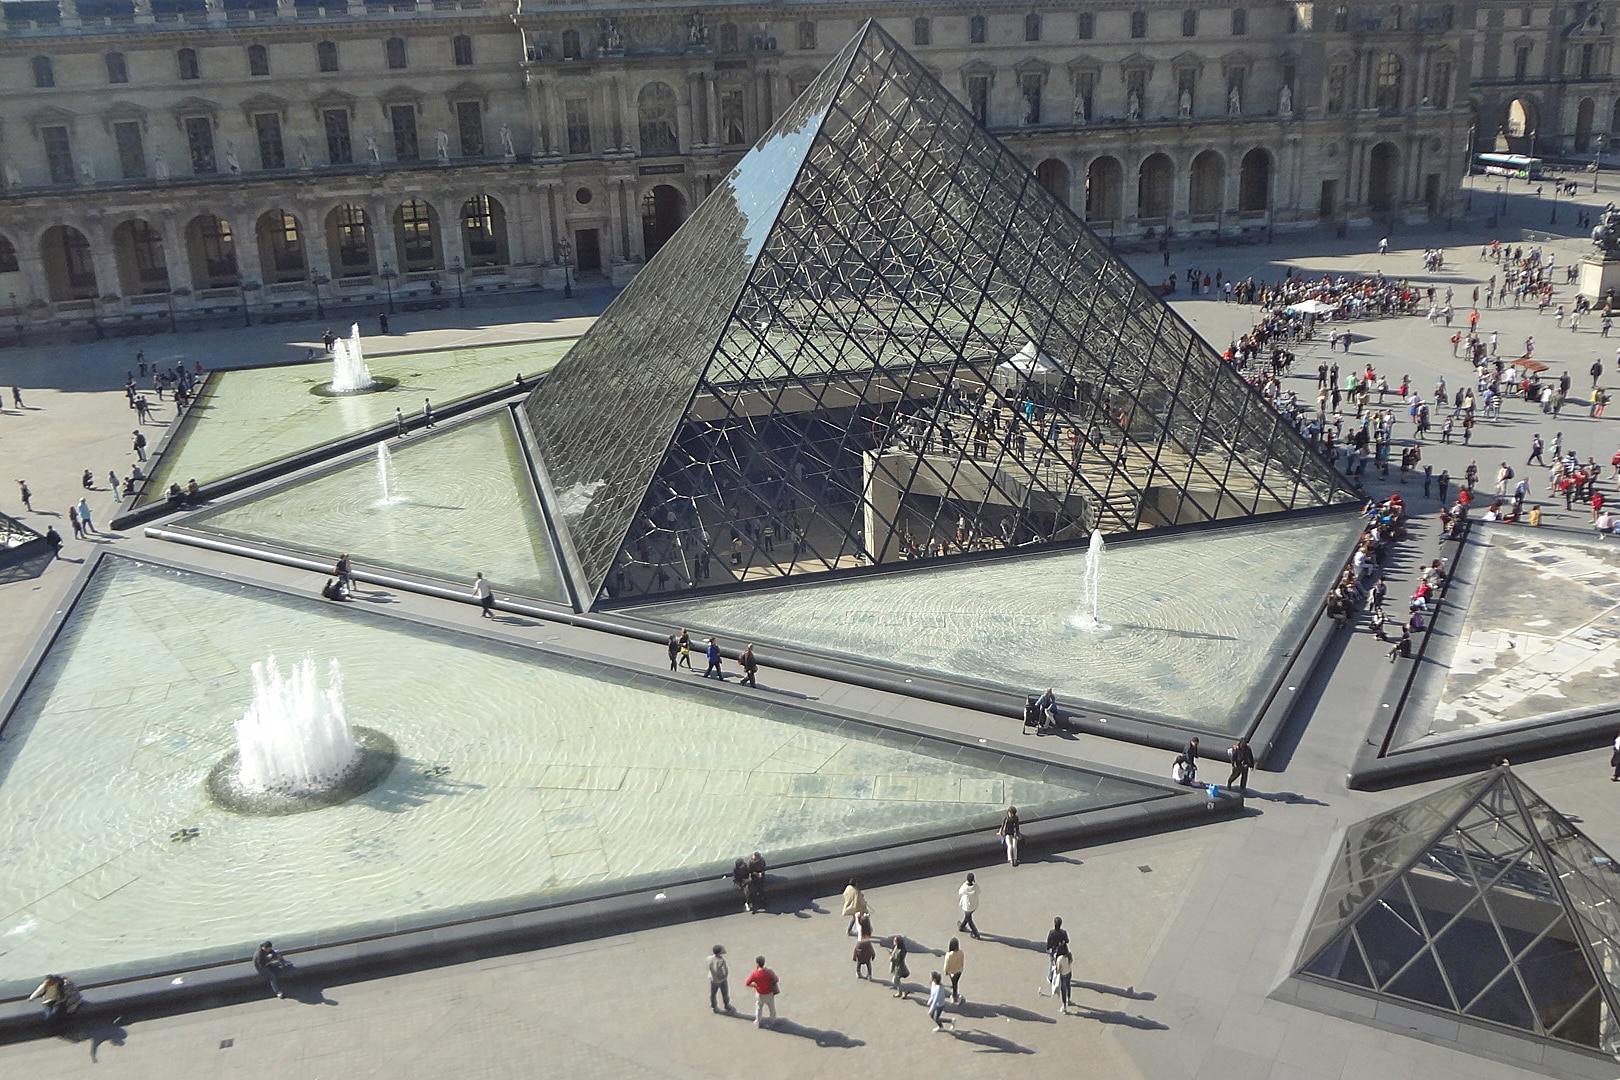 Entrance to the Louvre in Paris